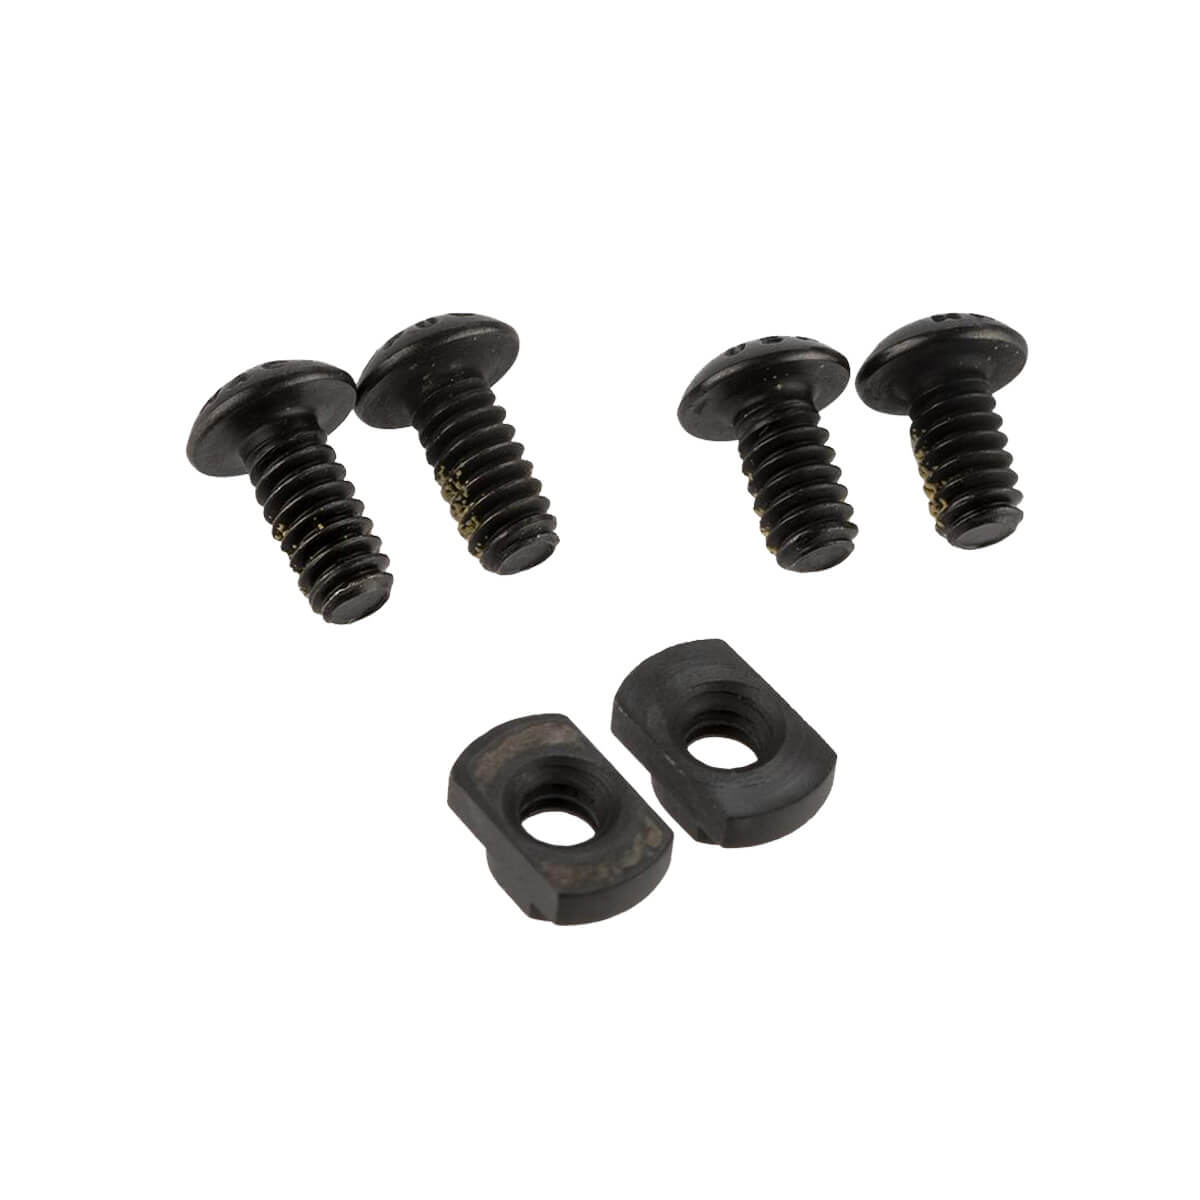 M-LOK Screw and Nut Replacement Set for Rail Sections with Wrench Black 12 Pack 